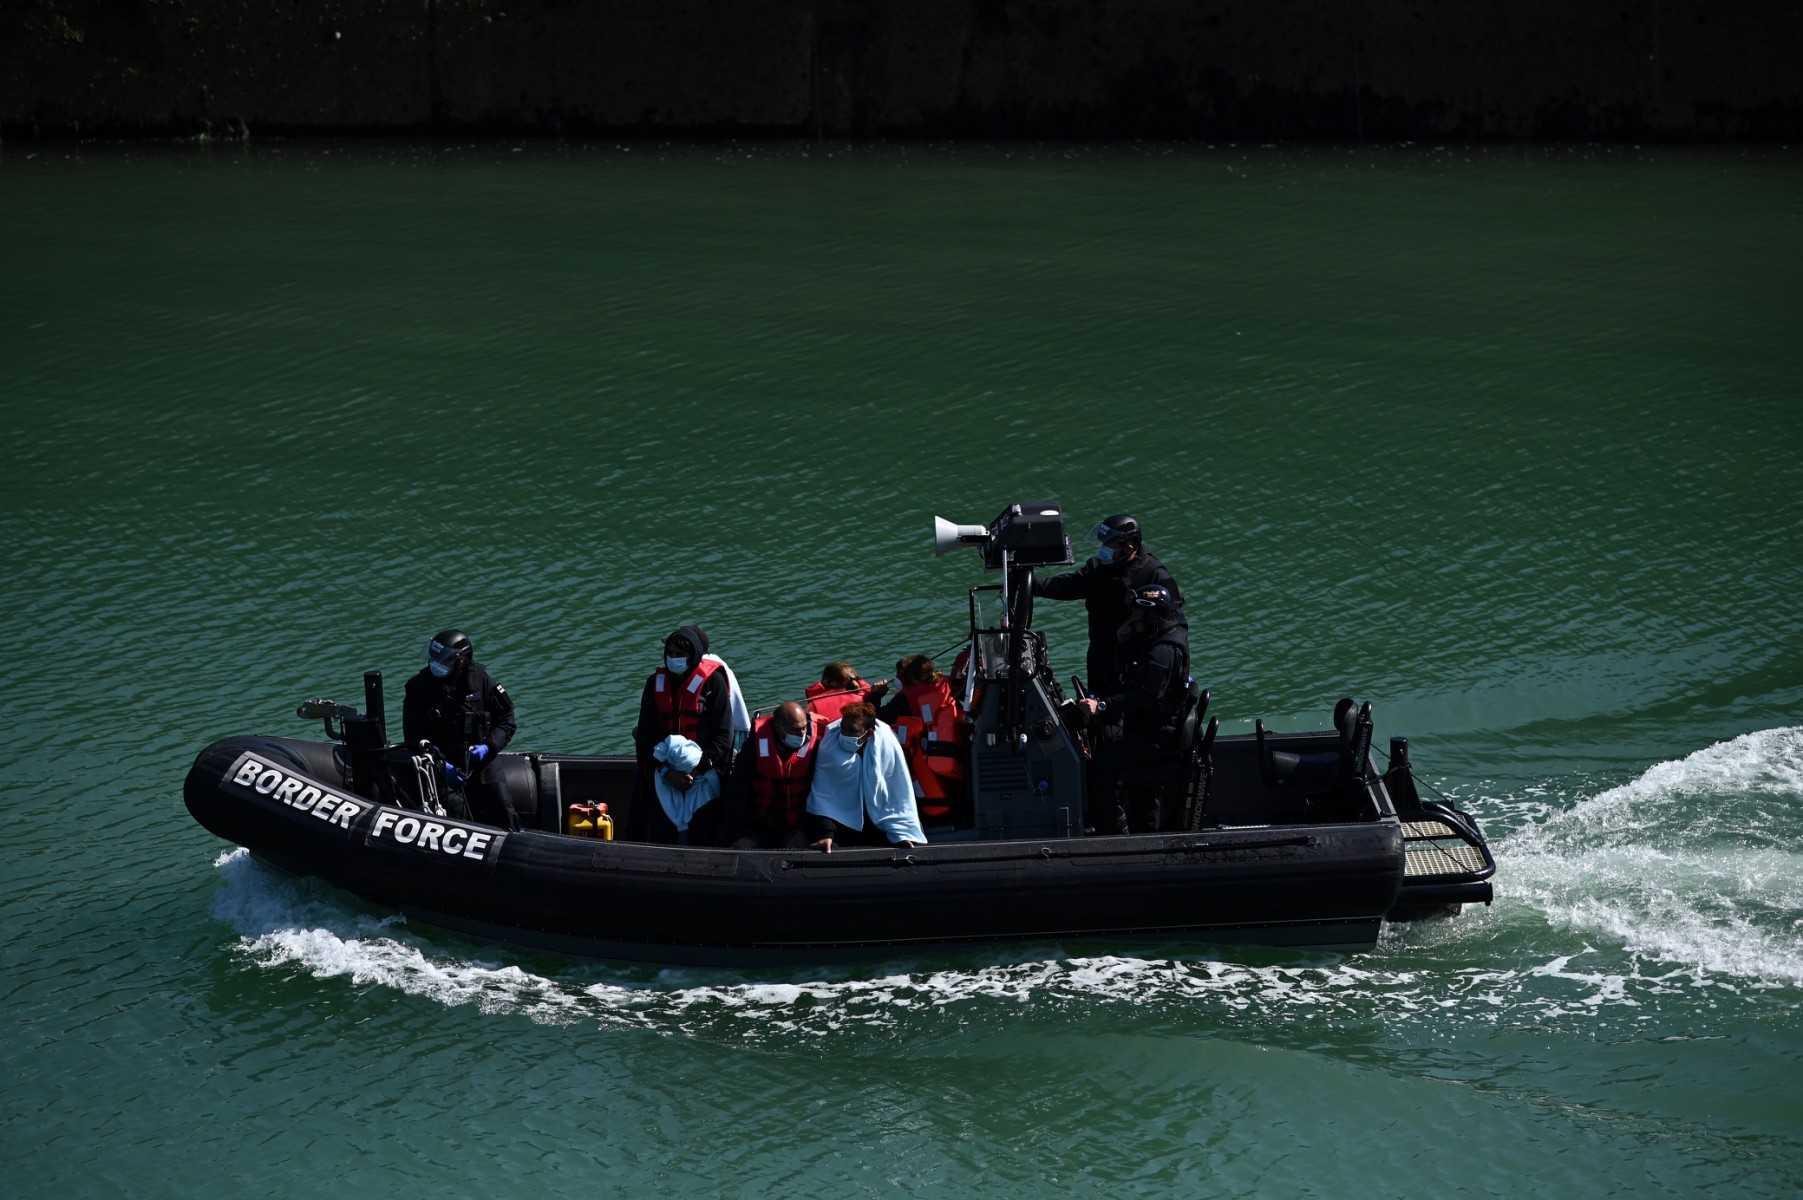 Migrants are seen on the UK Border Force rubber dinghy, after they were picked up at sea while attempting to cross the English Channel, and brought to the Marina in Dover, southeast England, on June 16. Photo: AFP 